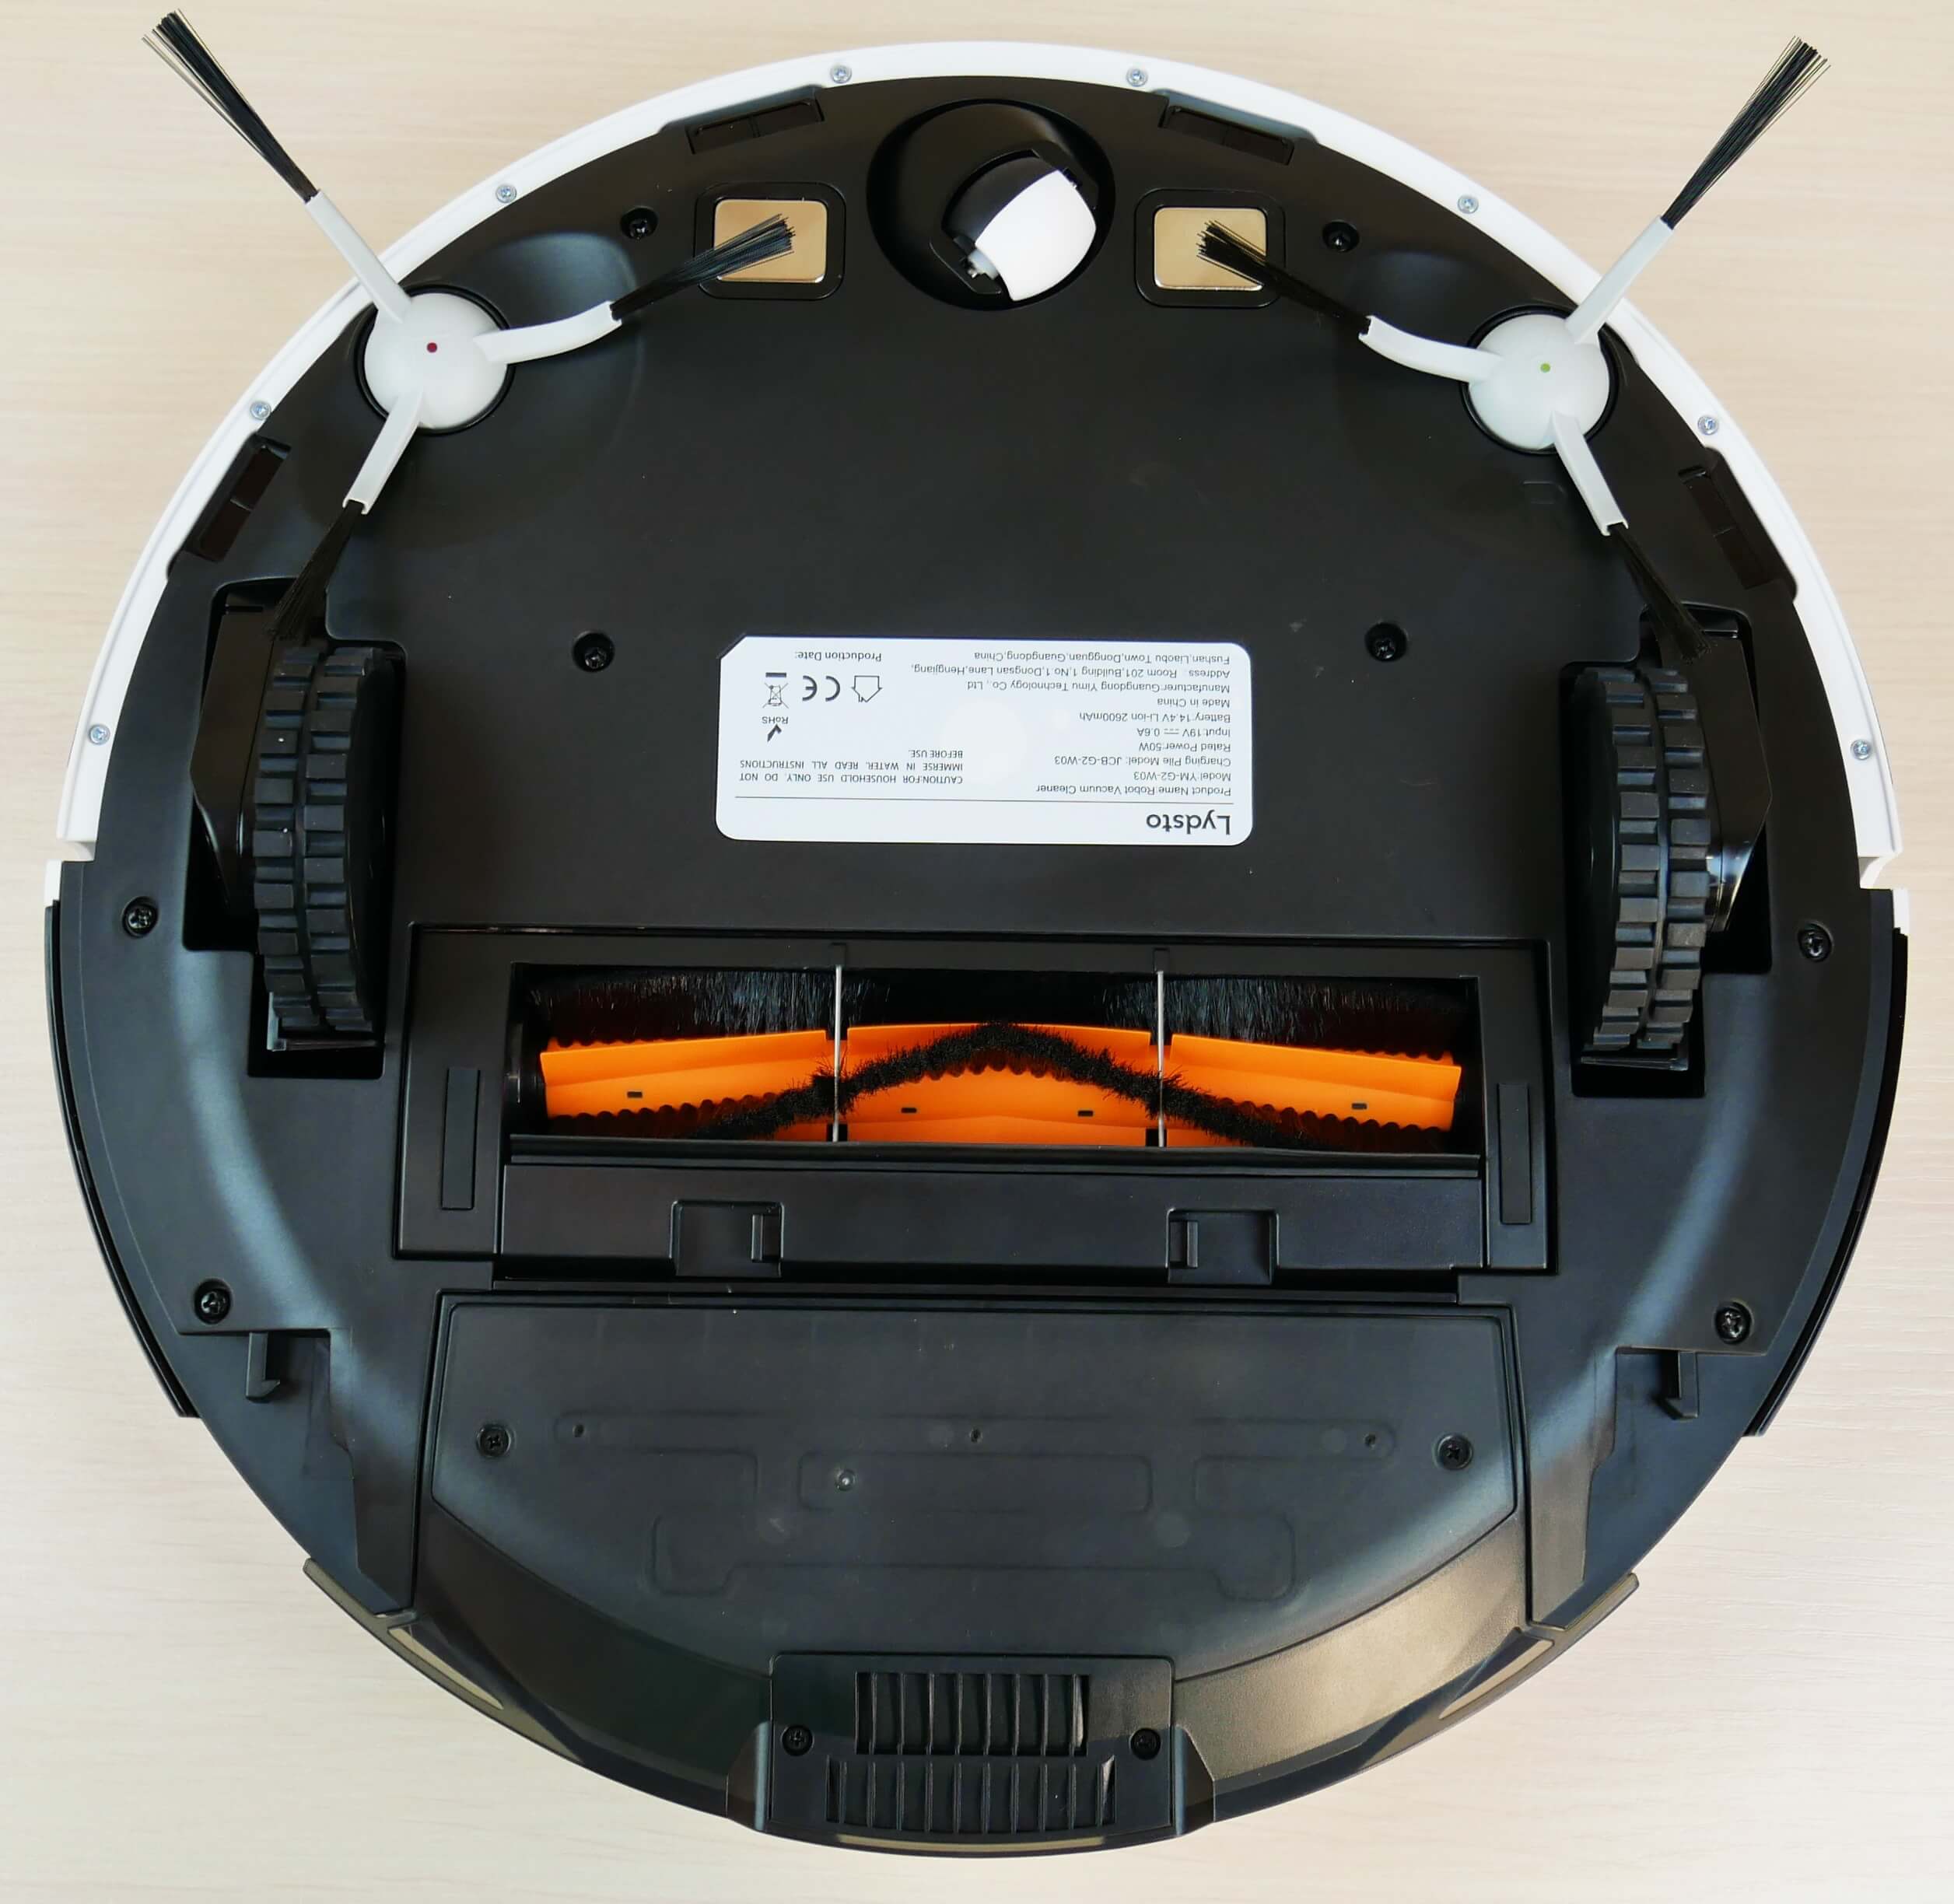 Xiaomi lydsto robot vacuum cleaner. Xiaomi lydsto g2. Робот-пылесос lydsto g2. Xiaomi lydsto g2 Vacuum. Робот-пылесос Xiaomi lydsto g2d Vacuum Cleaner.